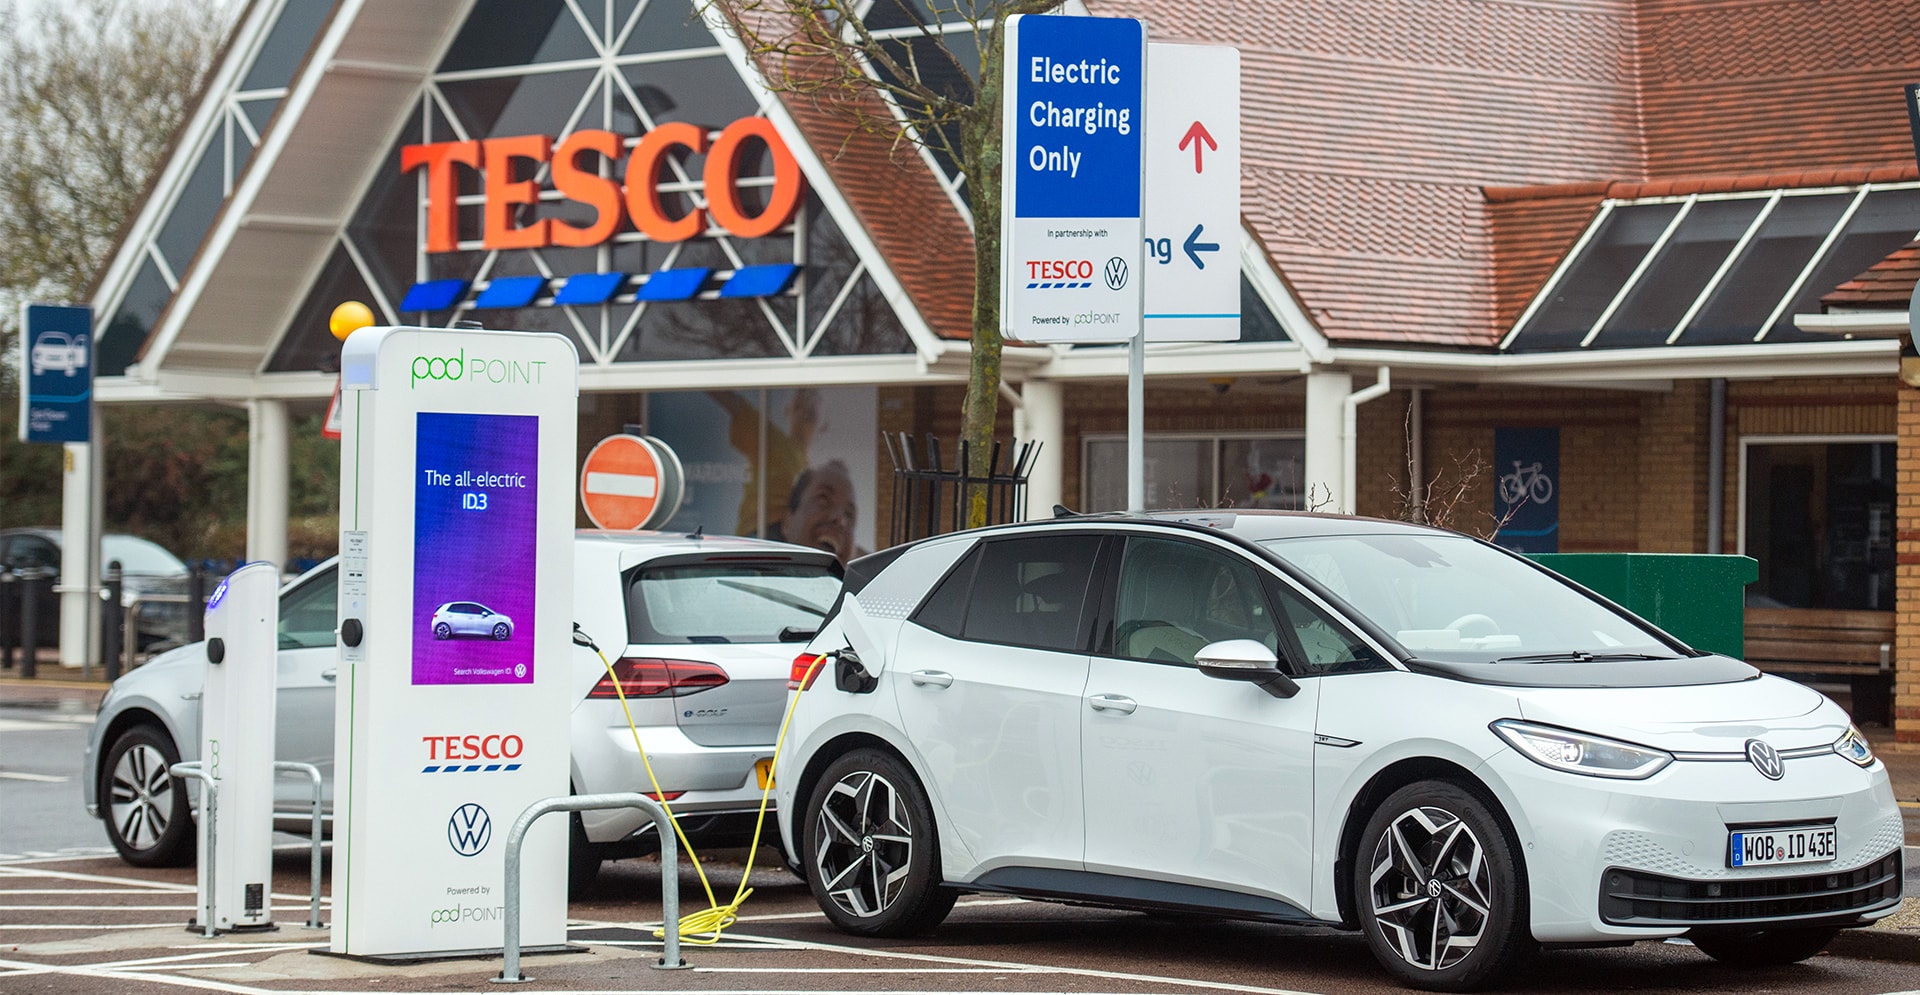 Better access to more charging bays will make it easier for people to switch to Electric Vehicles